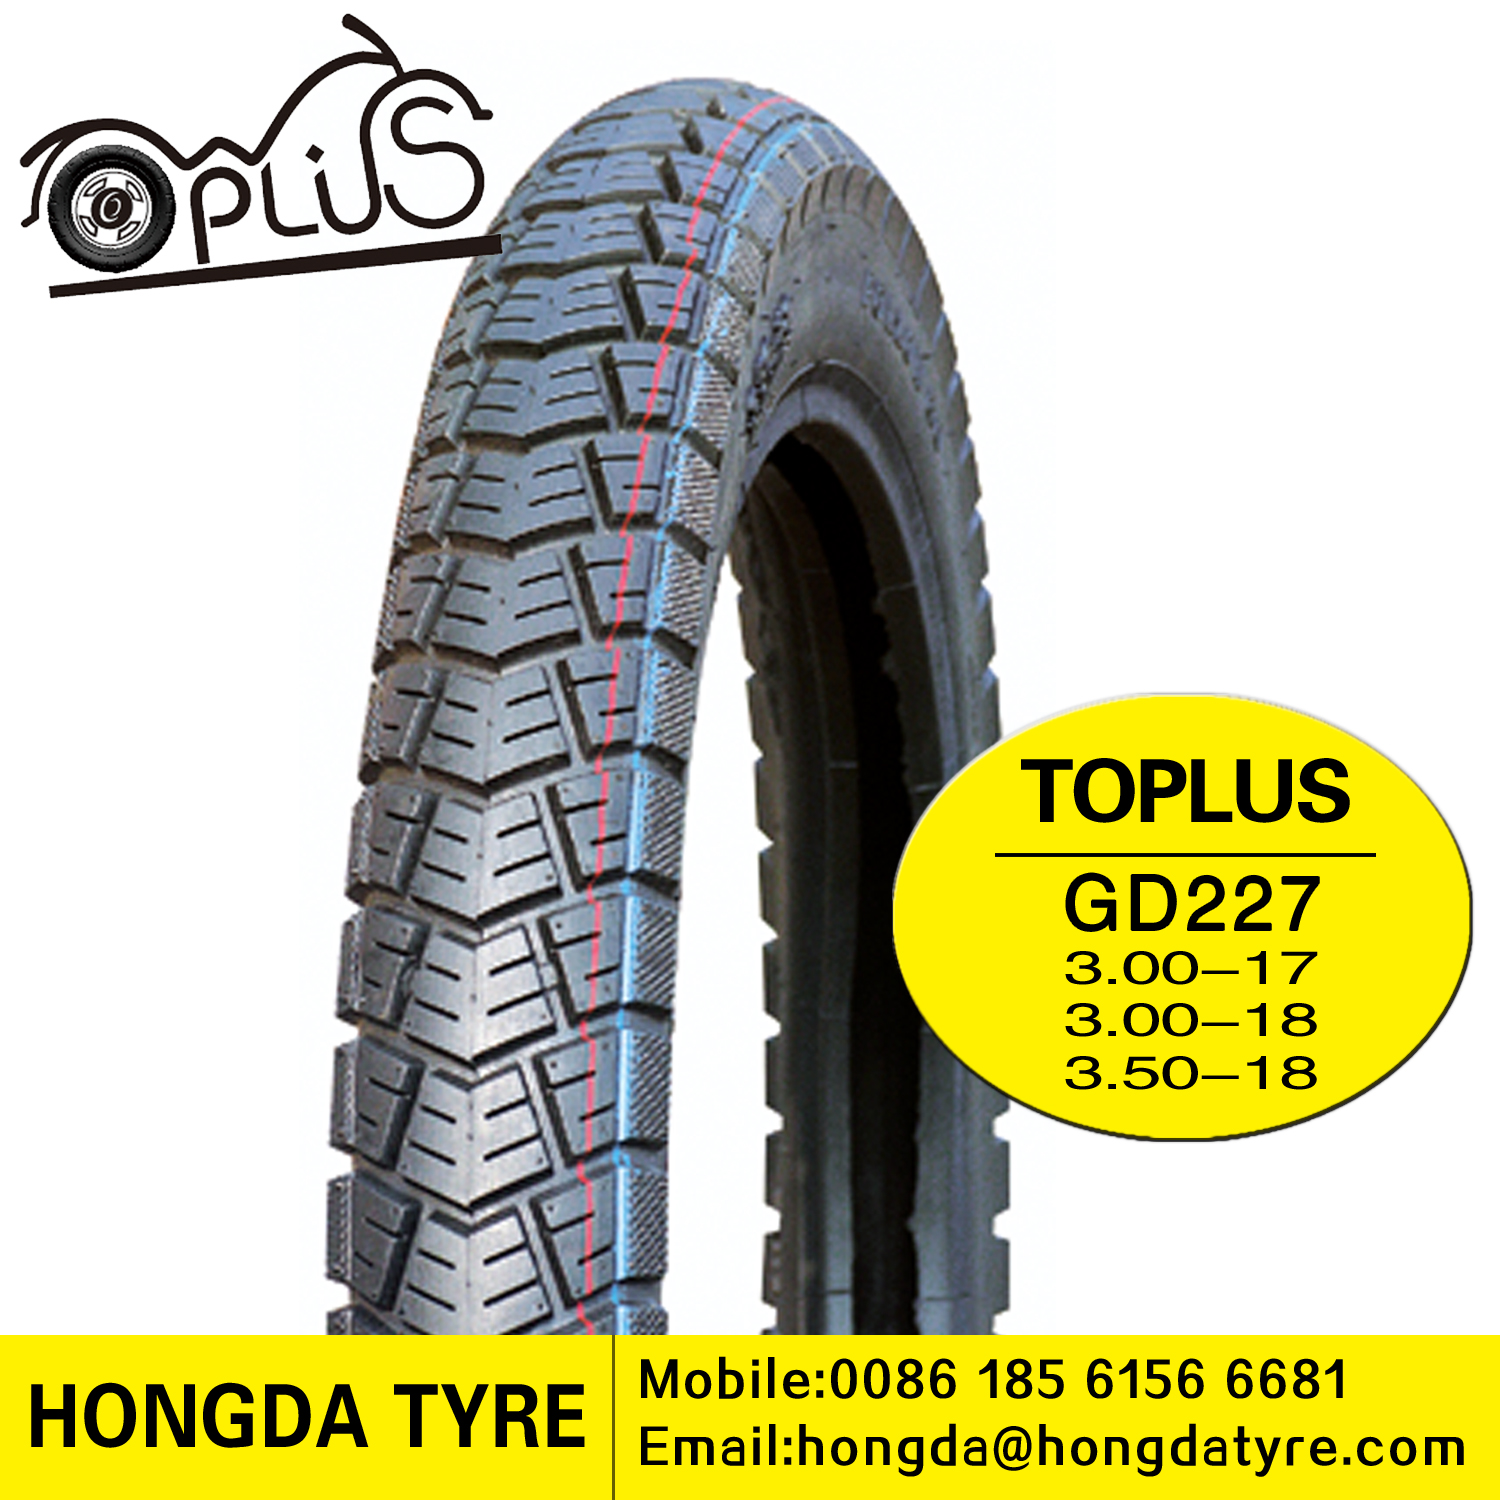 Motorcycle tyre GD227